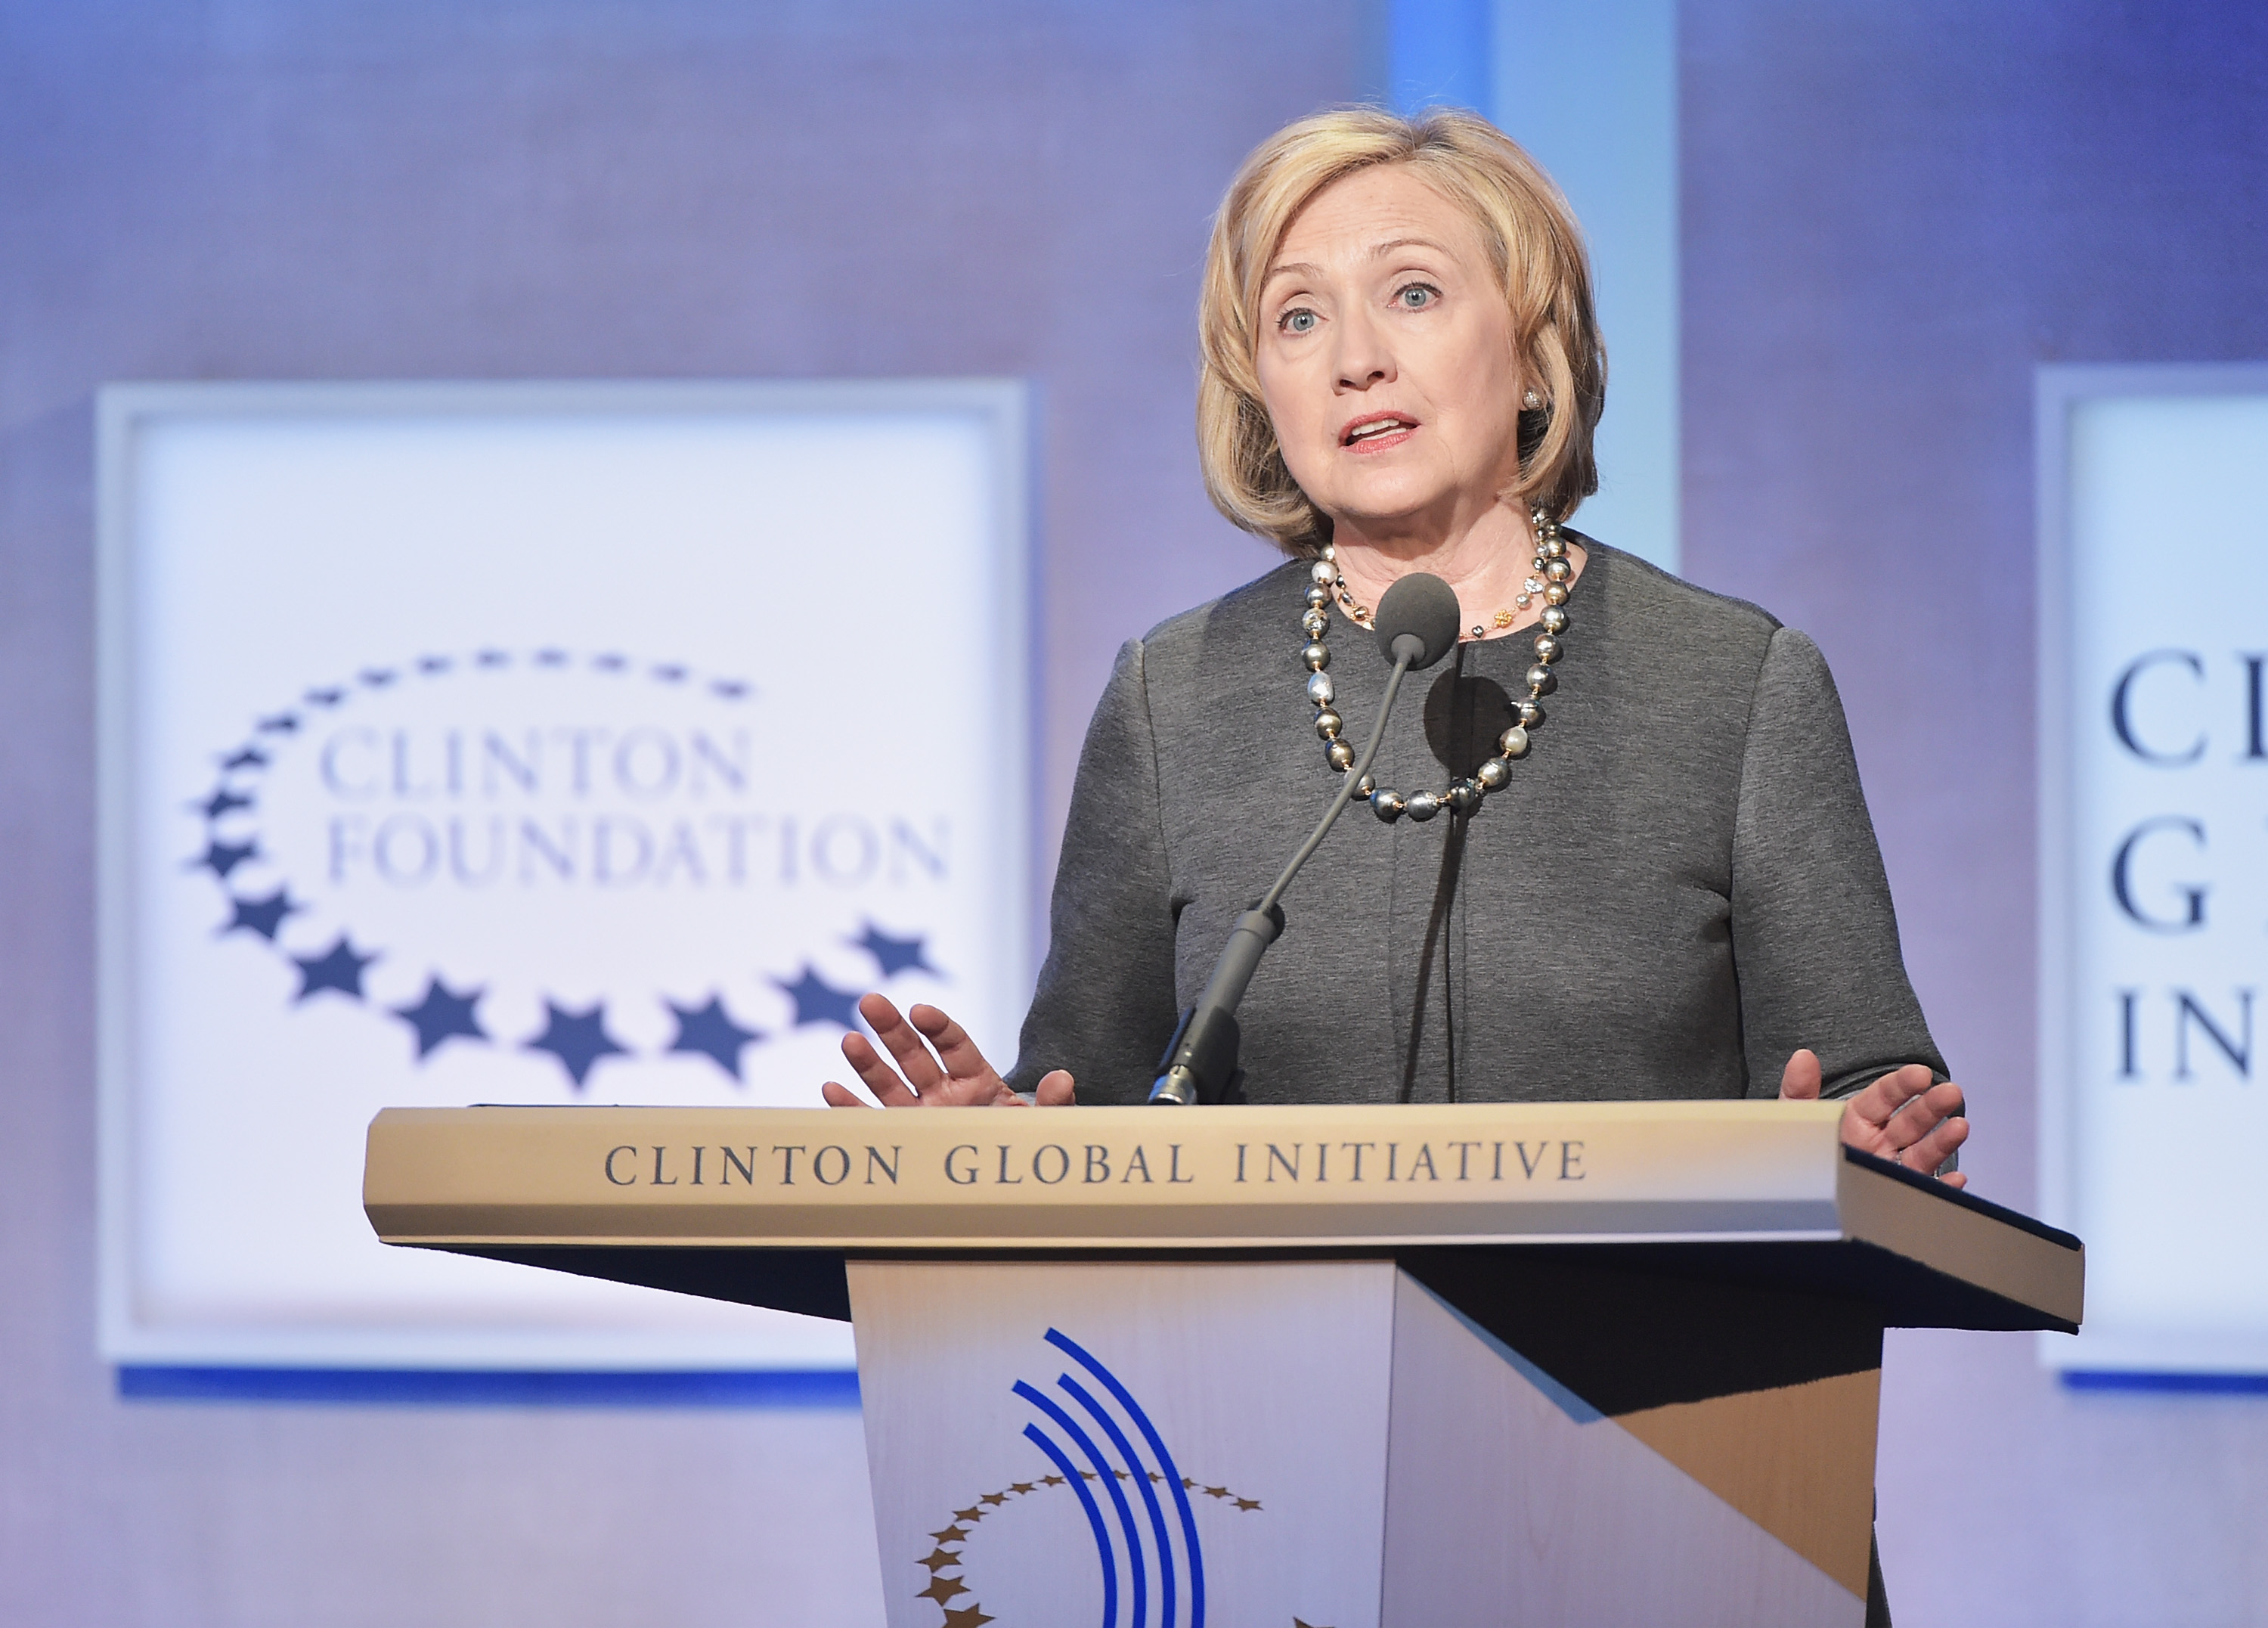 Former US Secretary of State Hillary Clinton  addresses the audience during the Opening Plenary Session: Reimagining Impact for the Clinton Global Initiative on September 22, 2014 at the Sheraton New York Hotel &amp; Towers in New York City. (Michael Loccisano&mdash;Getty Images)